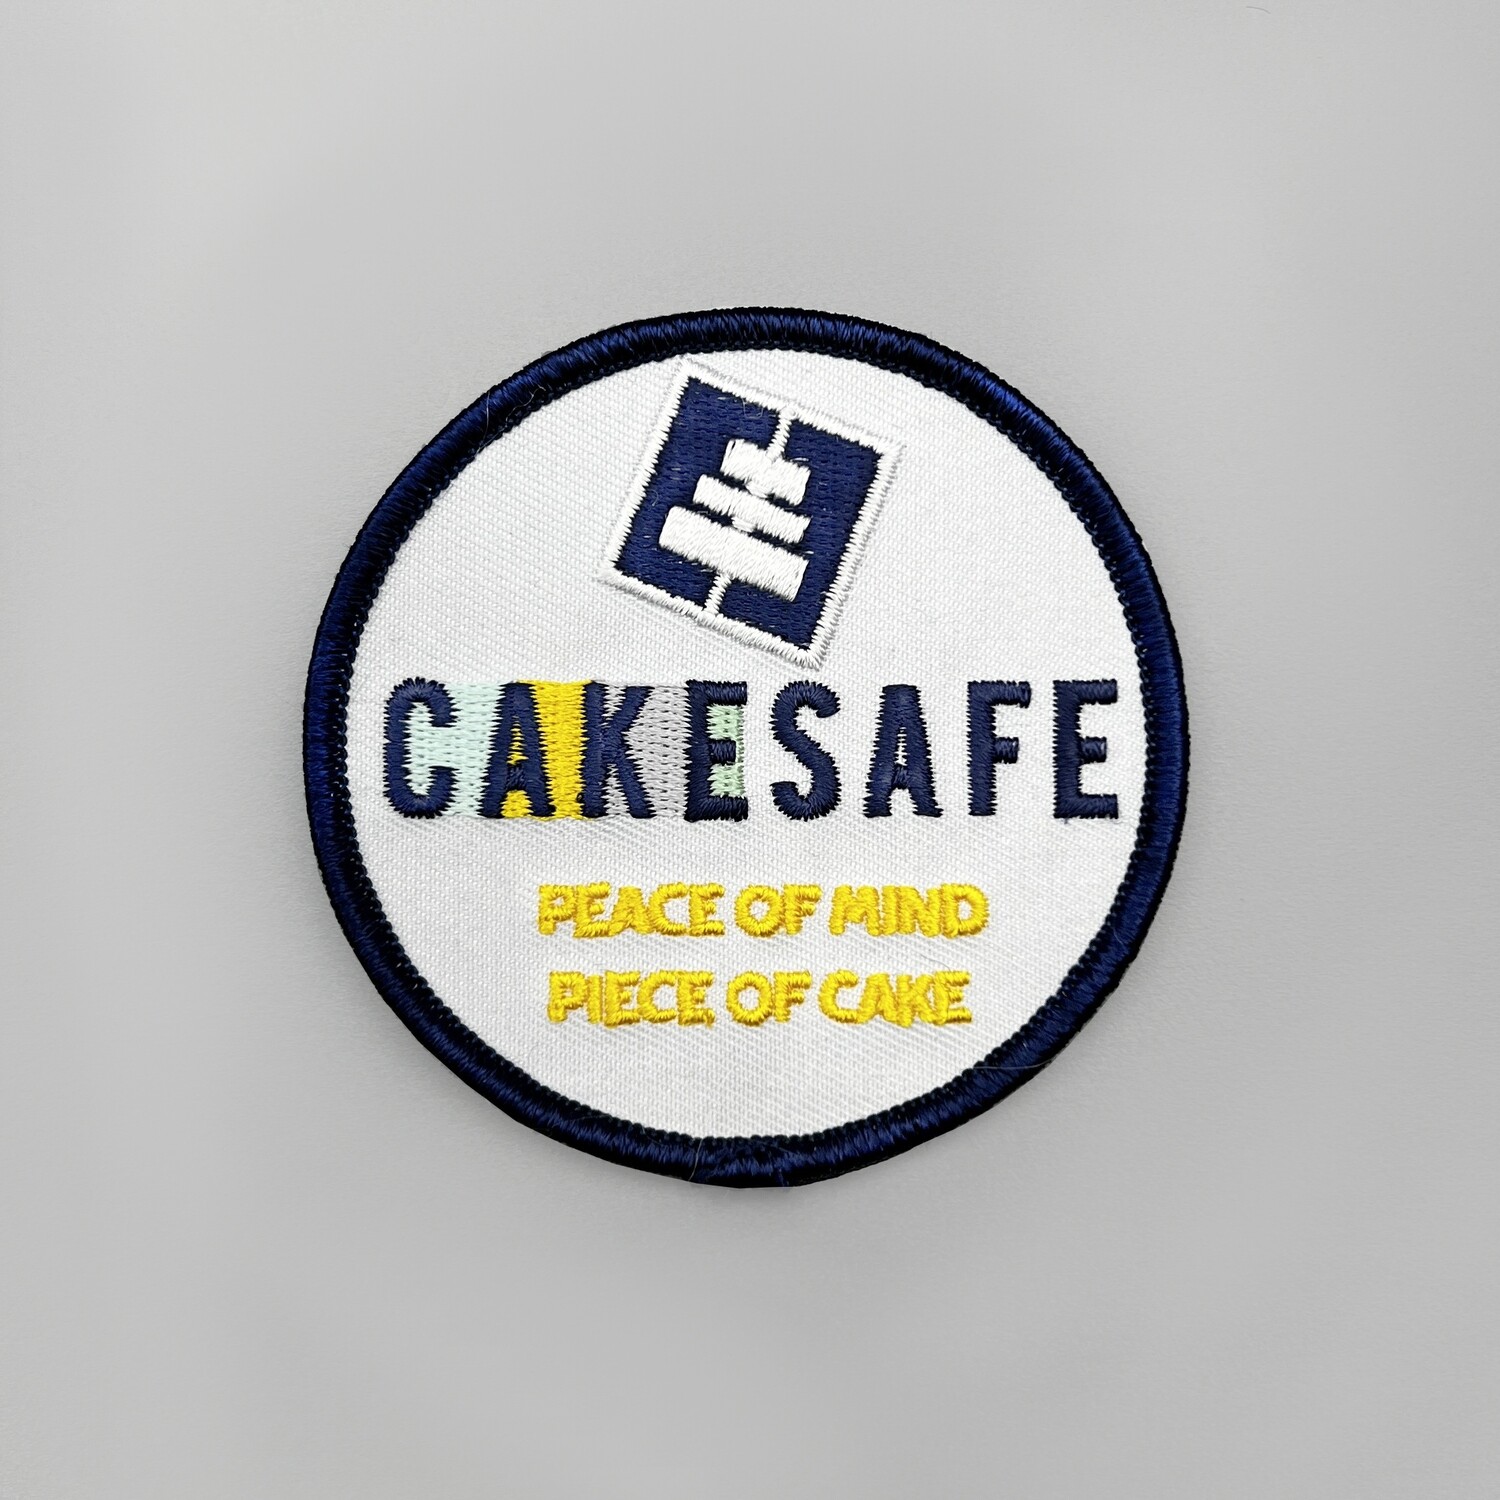 CakeSafe Patch (3 inch)